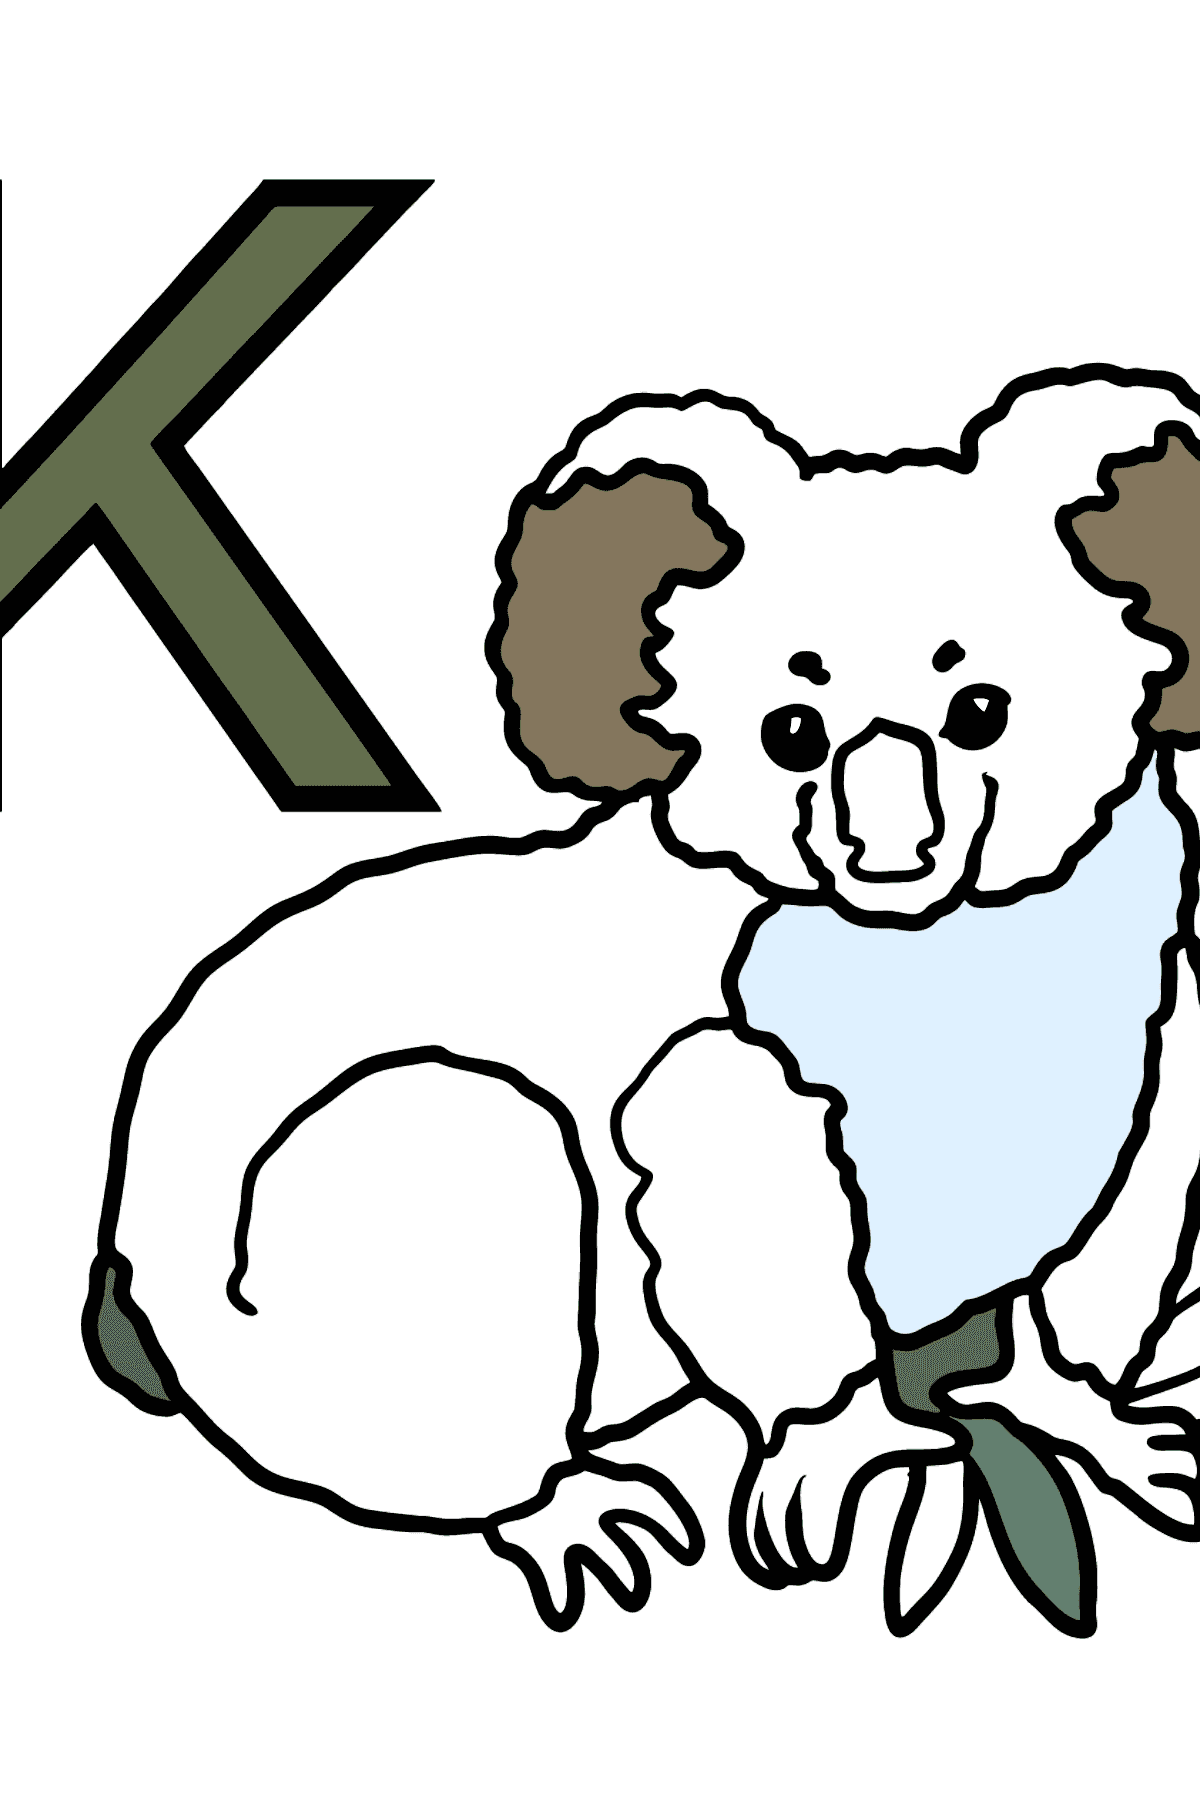 Spanish Letter K coloring pages - KOALA - Coloring Pages for Kids